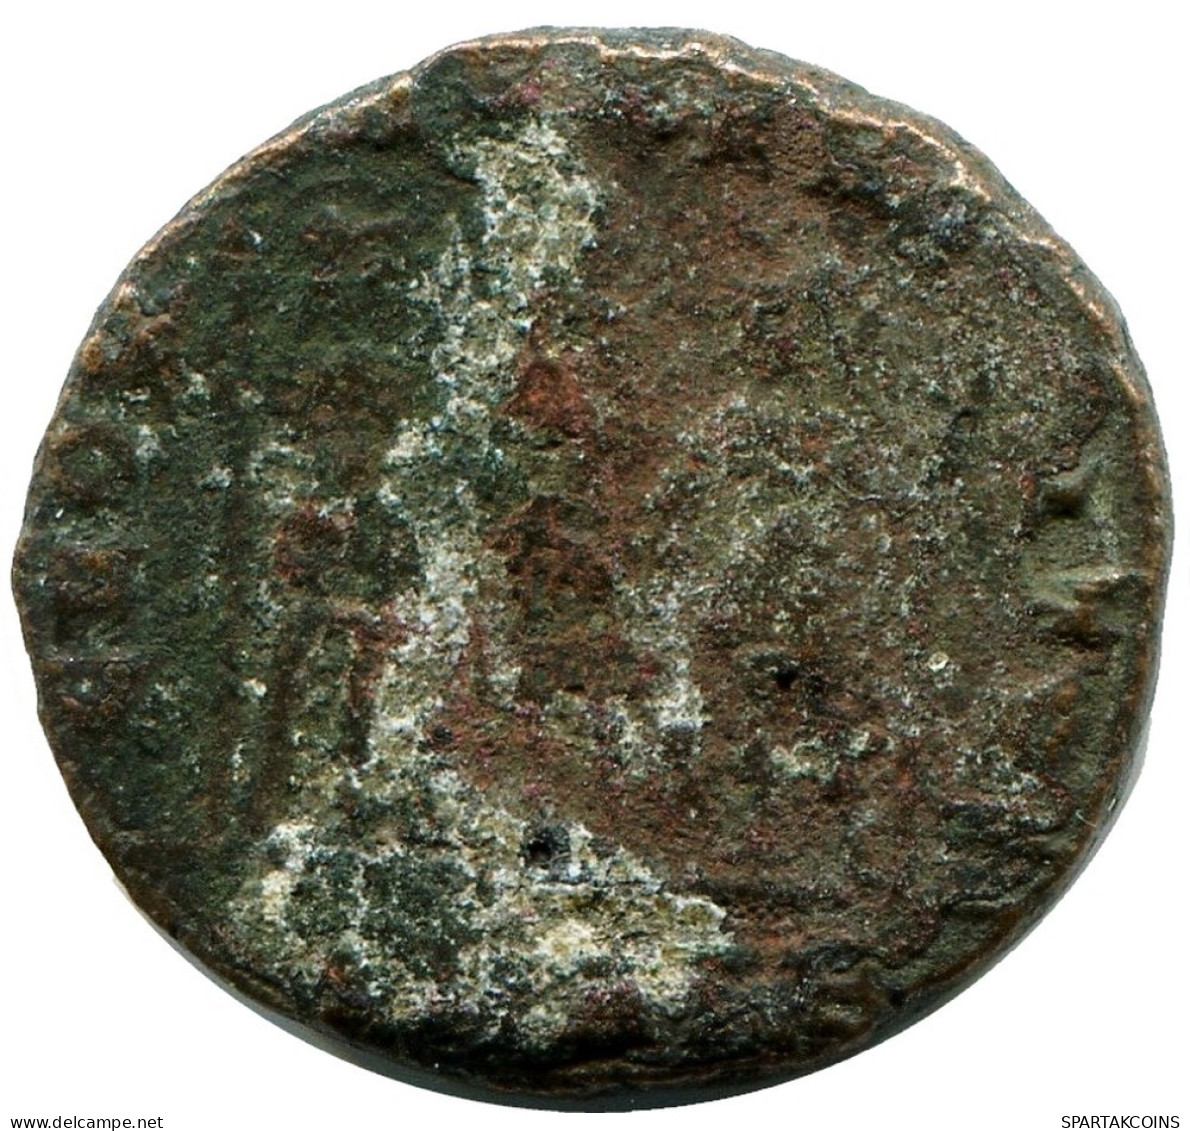 CONSTANS MINTED IN ALEKSANDRIA FROM THE ROYAL ONTARIO MUSEUM #ANC11419.14.F.A - El Impero Christiano (307 / 363)